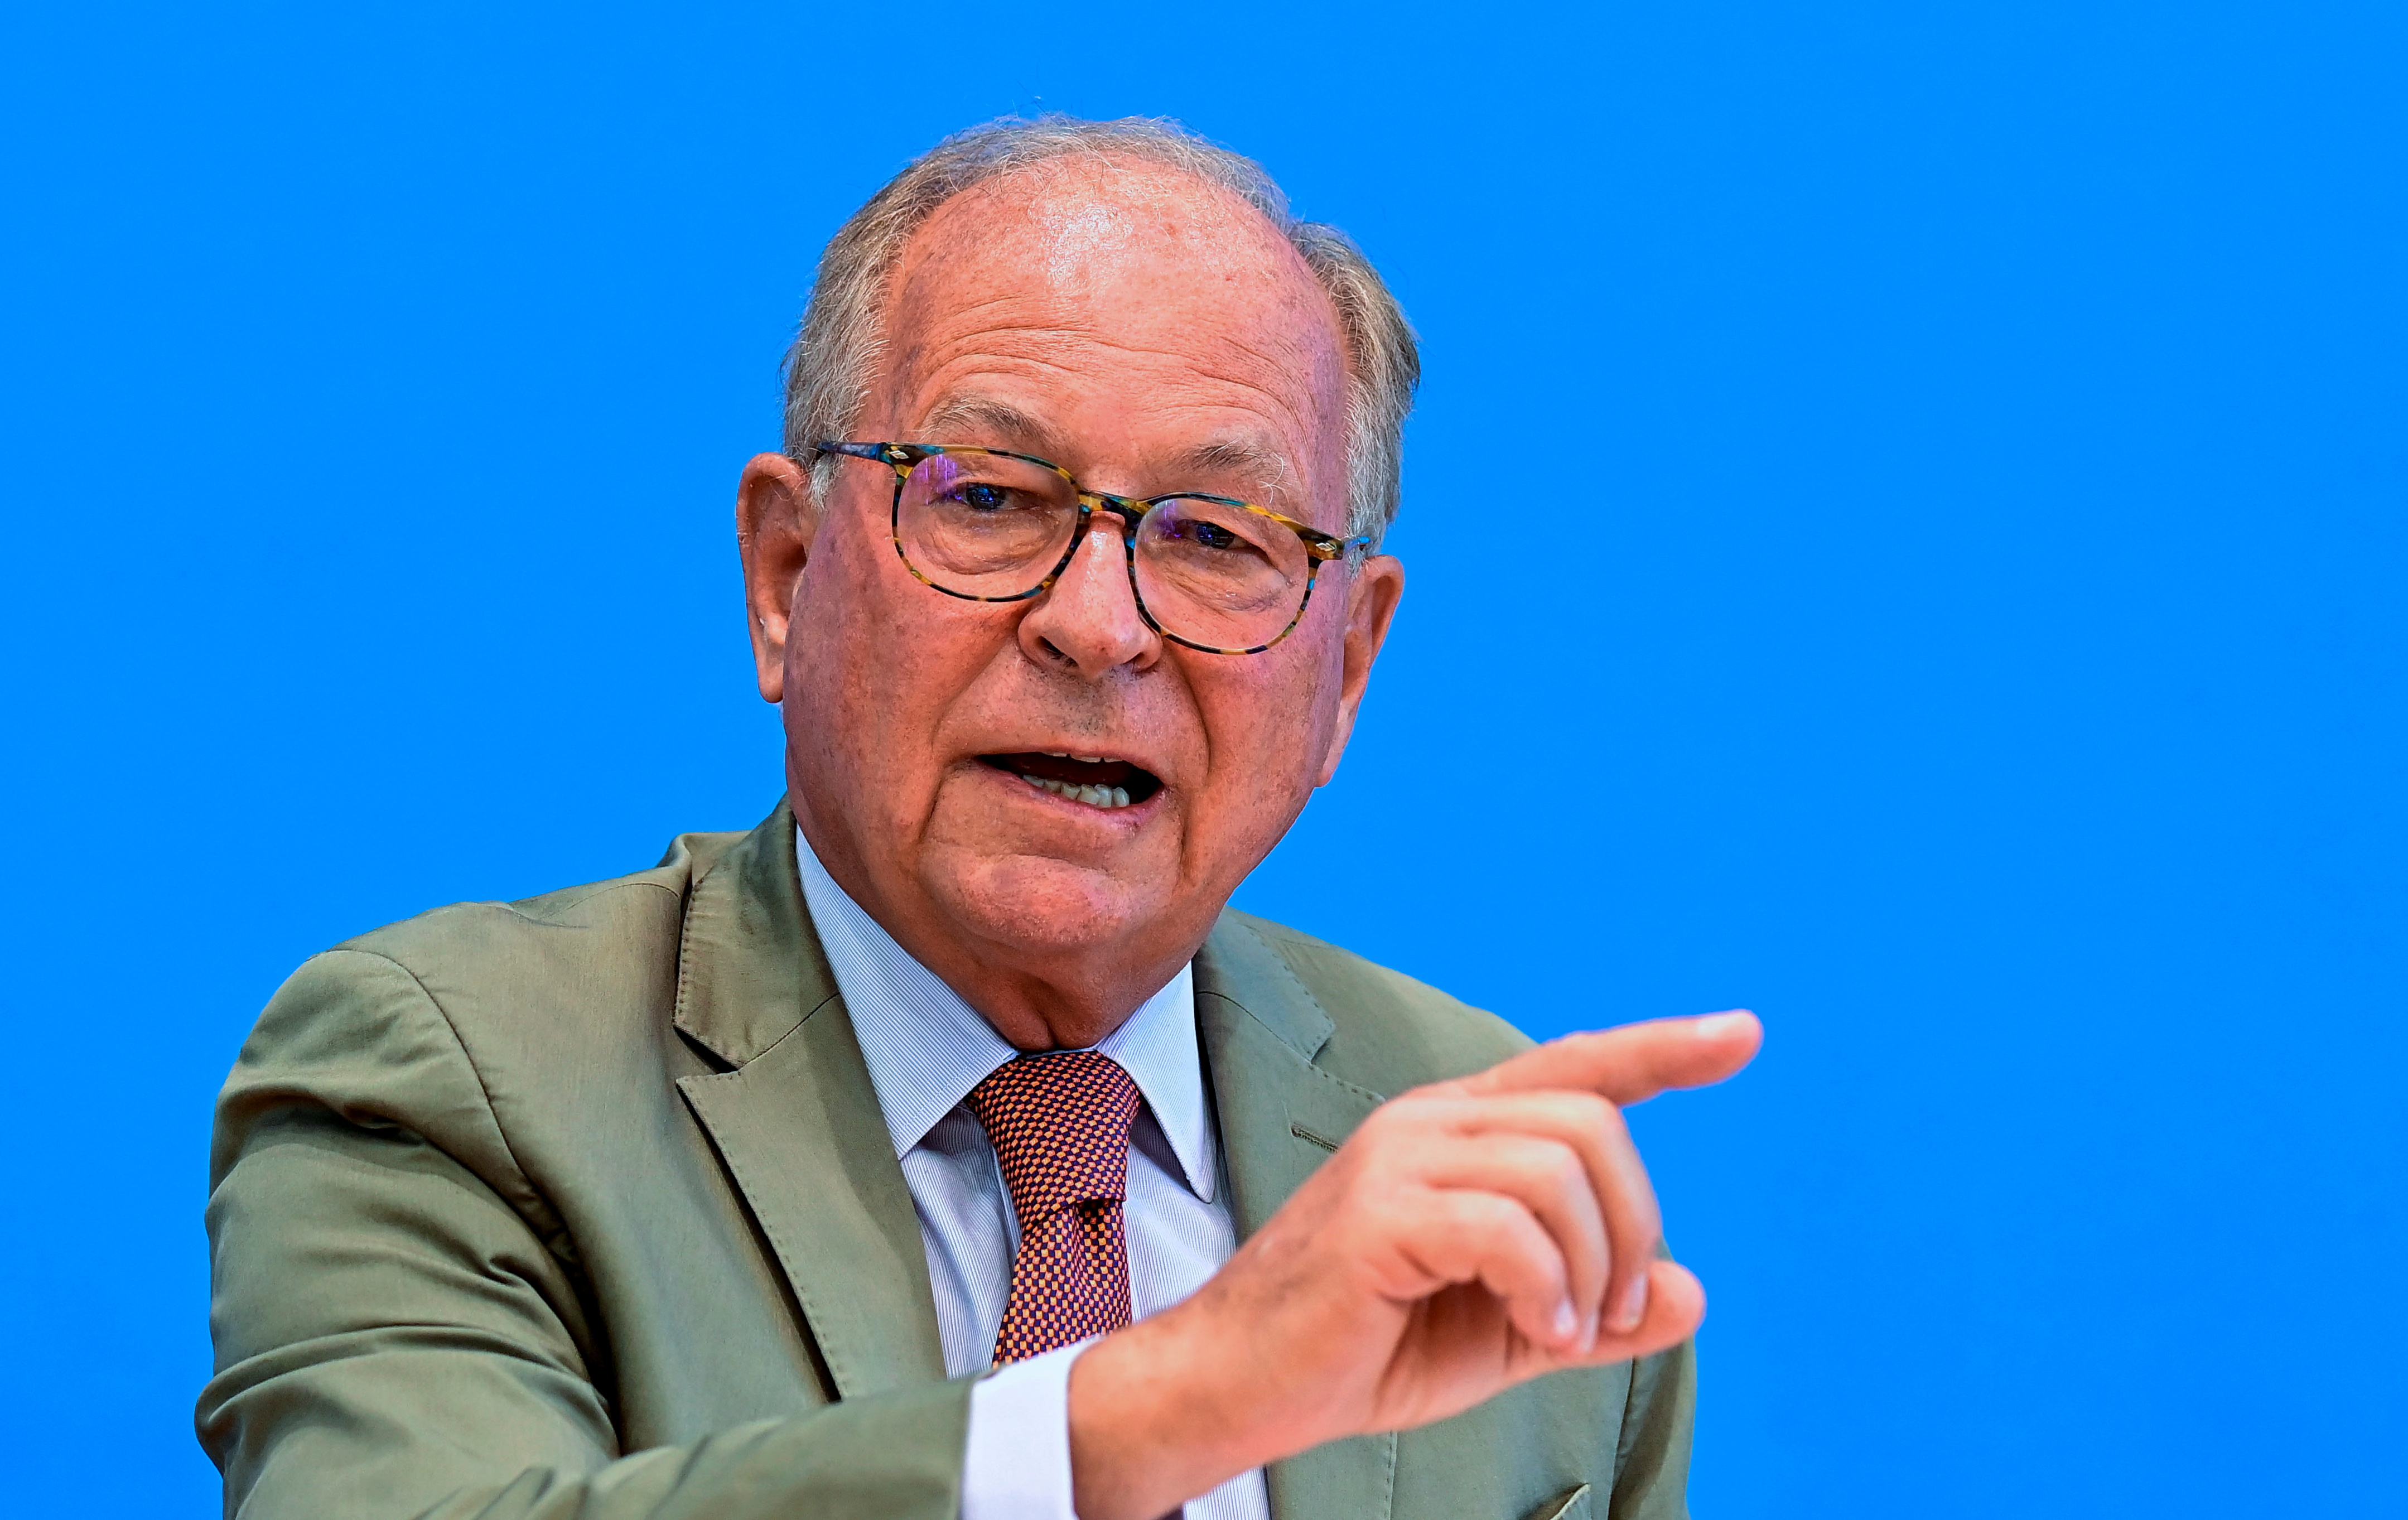 News conference with MSC chairman Ischinger in Berlin